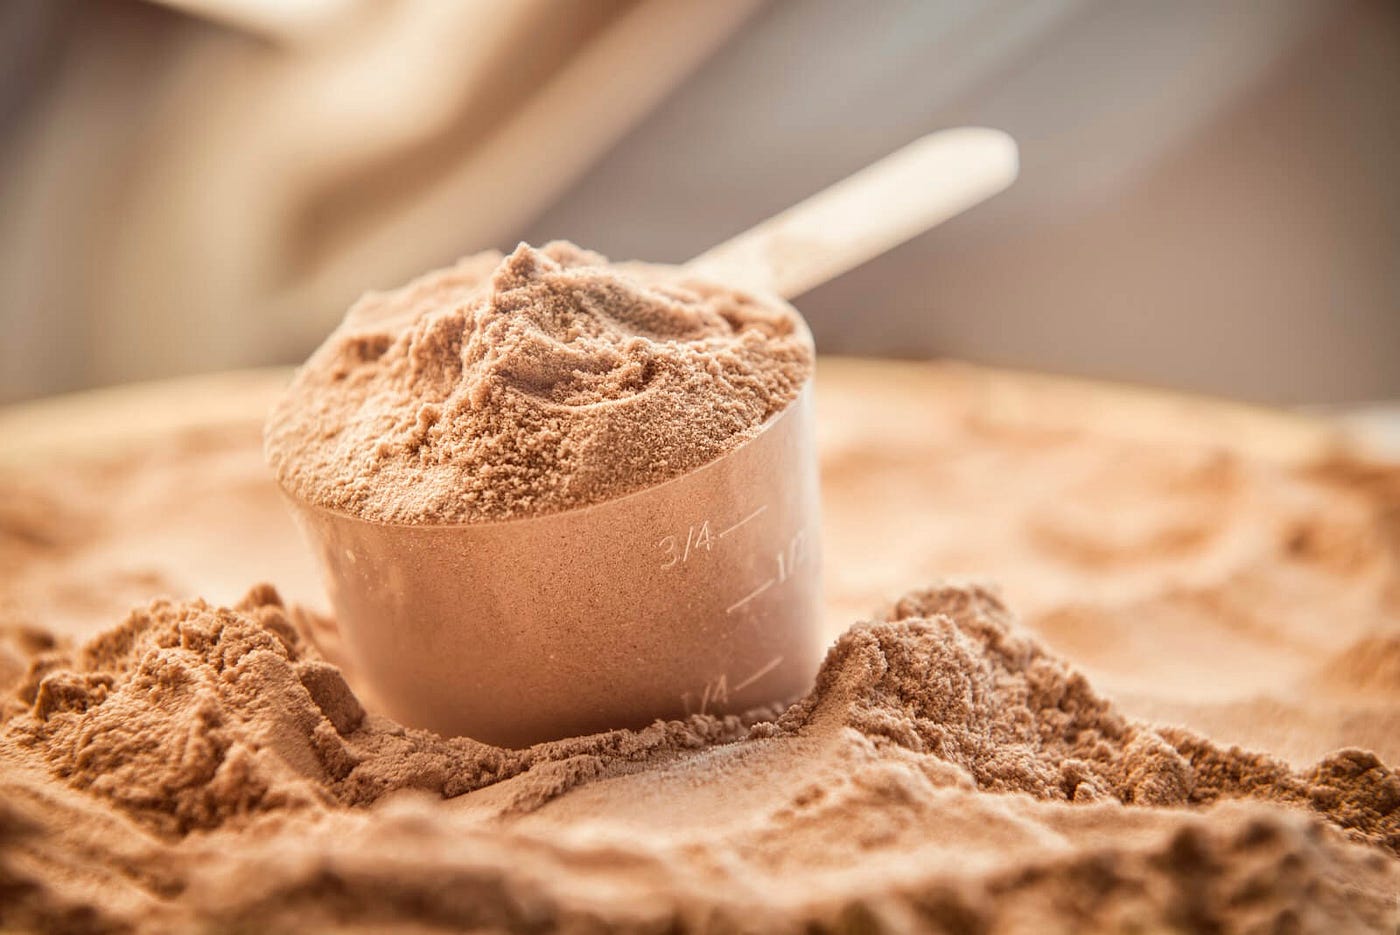 Weighing in: Whey Protein. Riding along the new wave of health